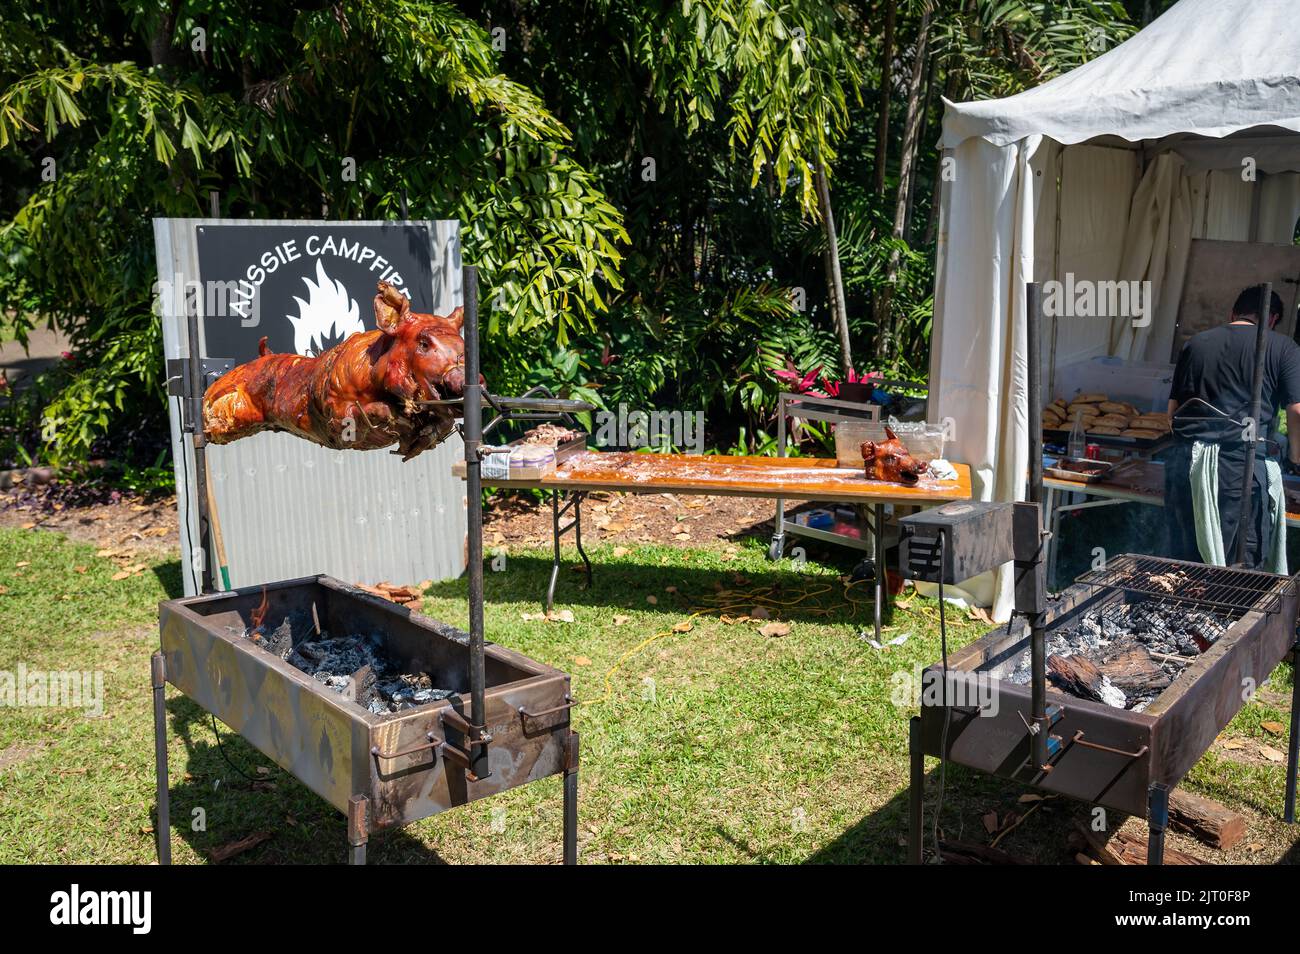 A whole succulent pig roasting on spit over a purpose-built rectangular steel fire pit at a festival in Port Douglas, Far North Queensland, Australia. Stock Photo